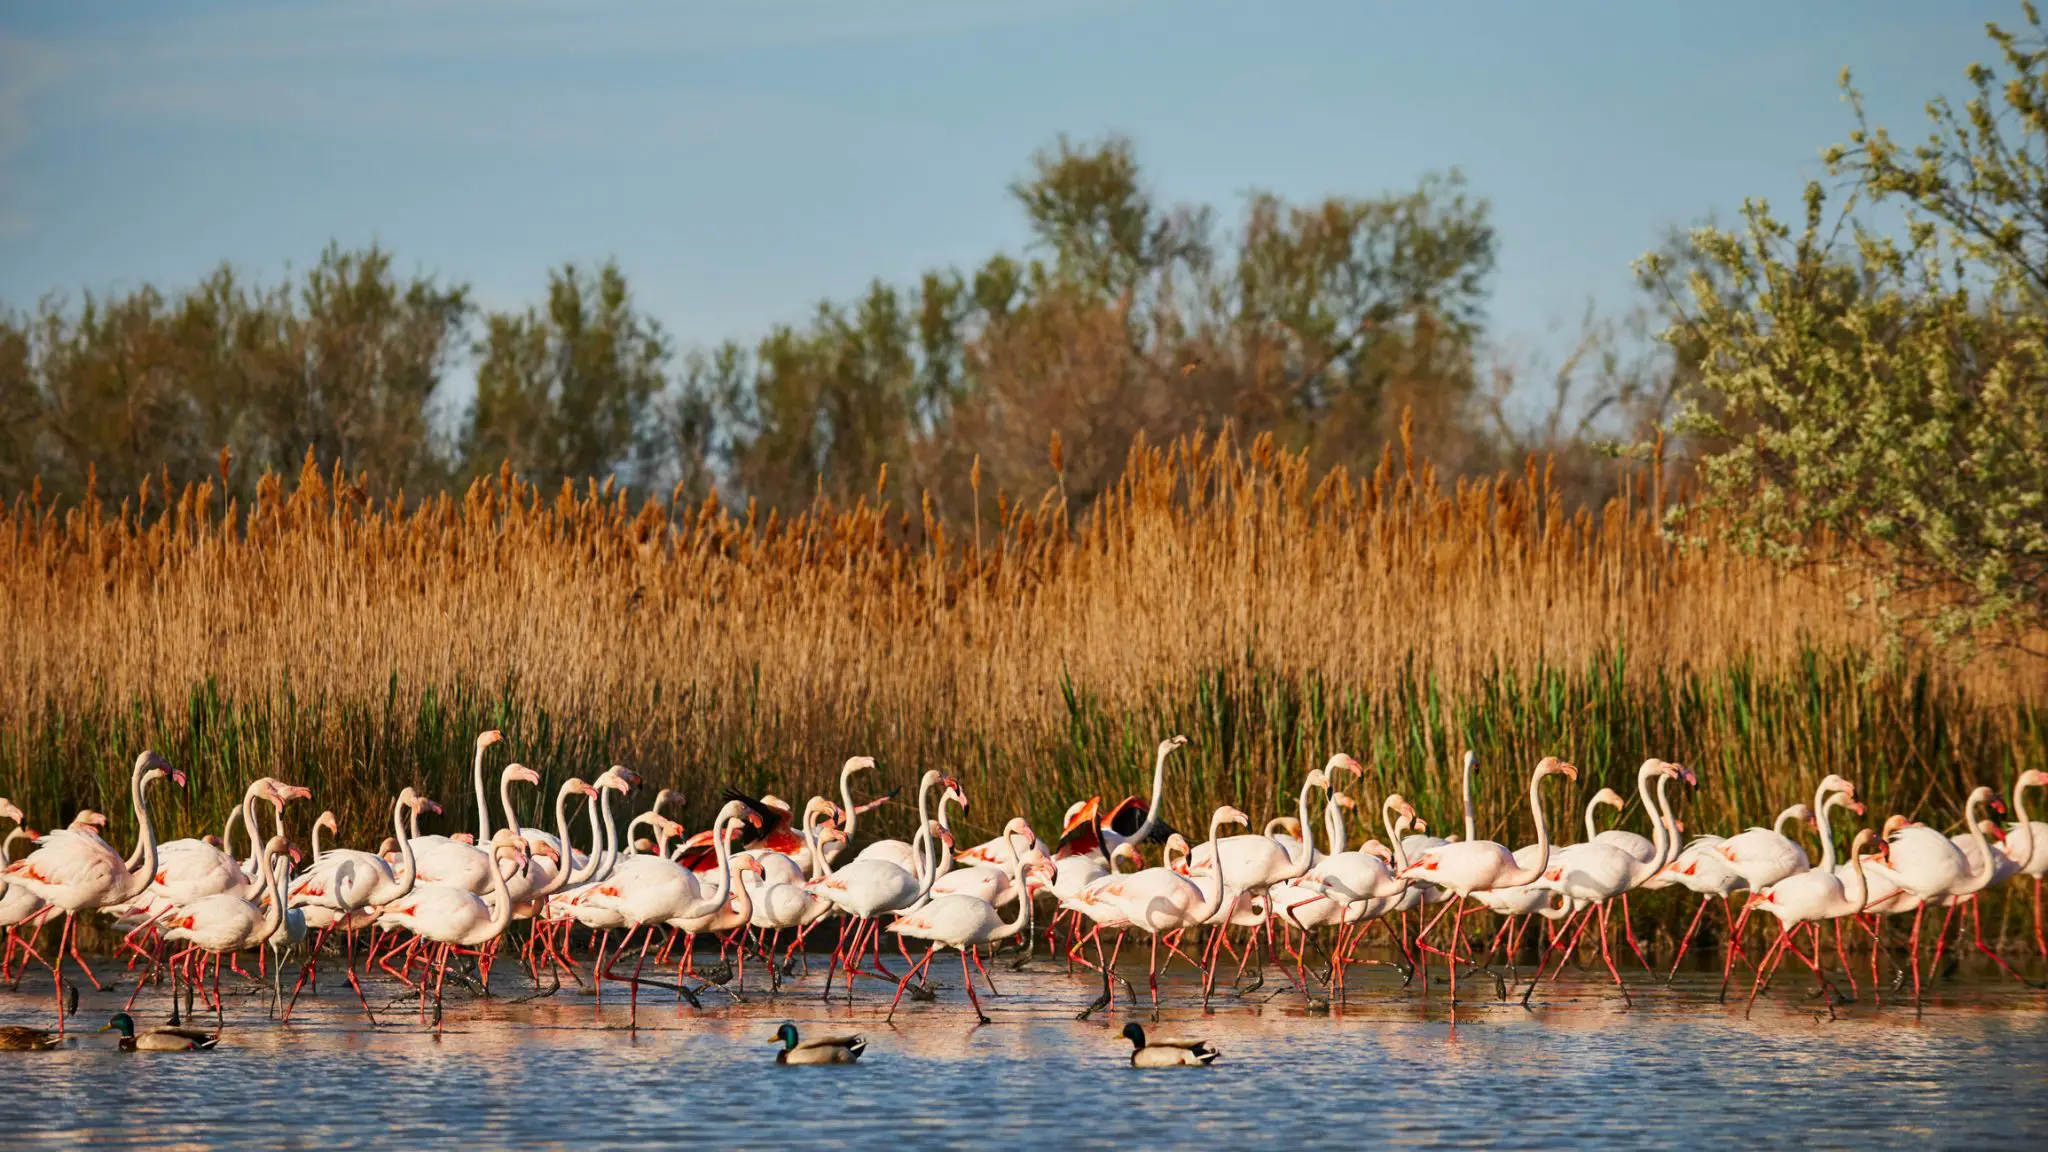 Wildlife spotting in the Camargue in the South of France